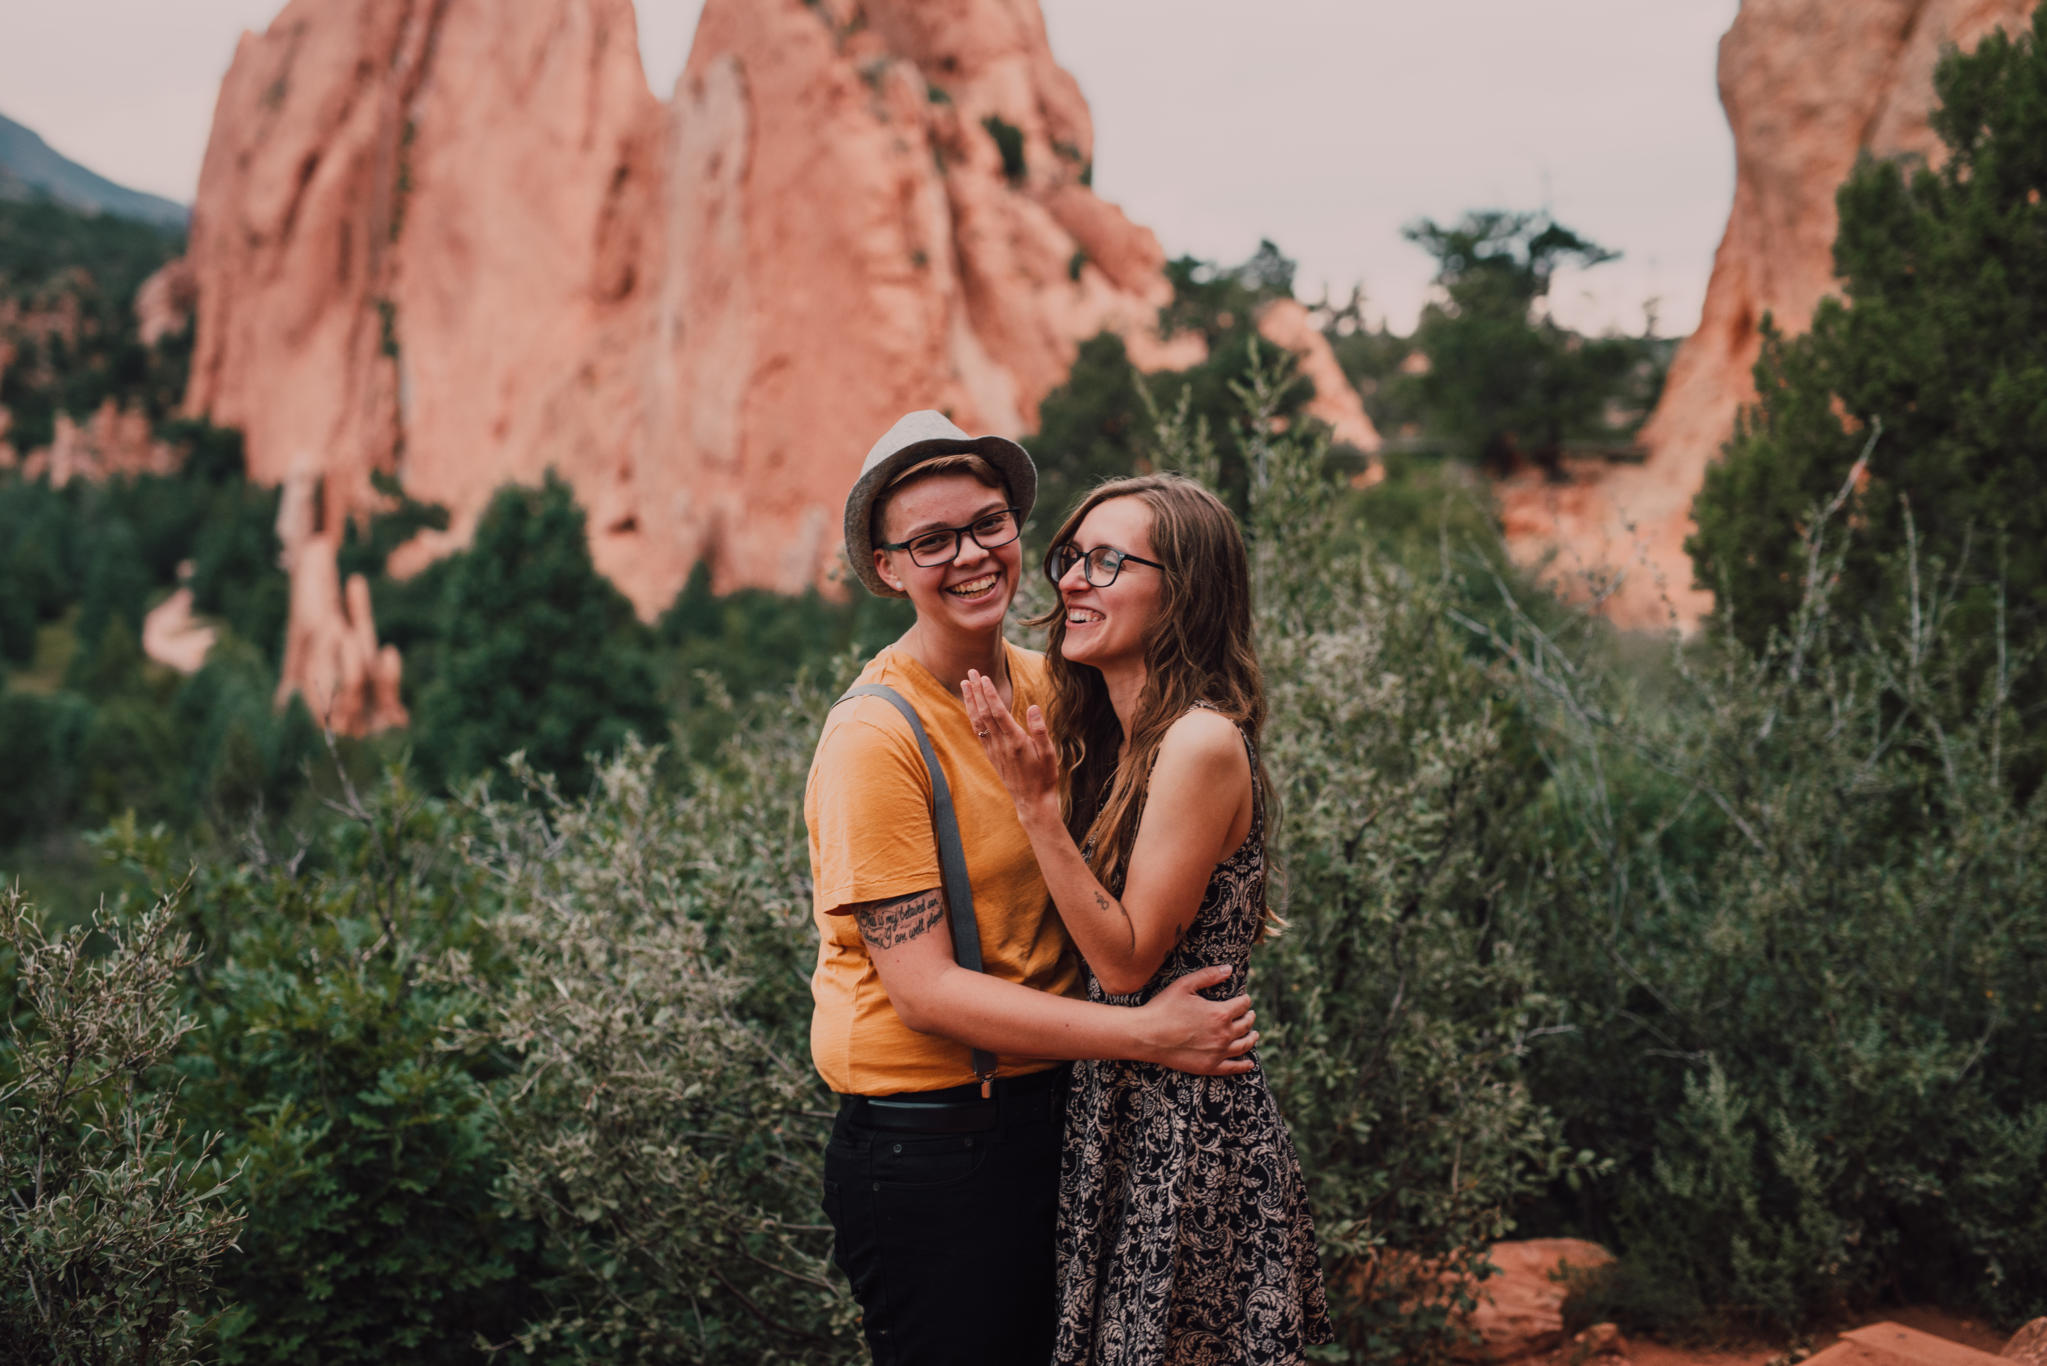 Same Sex Engagement Session at Garden of the Gods, Colorado Springs, CO